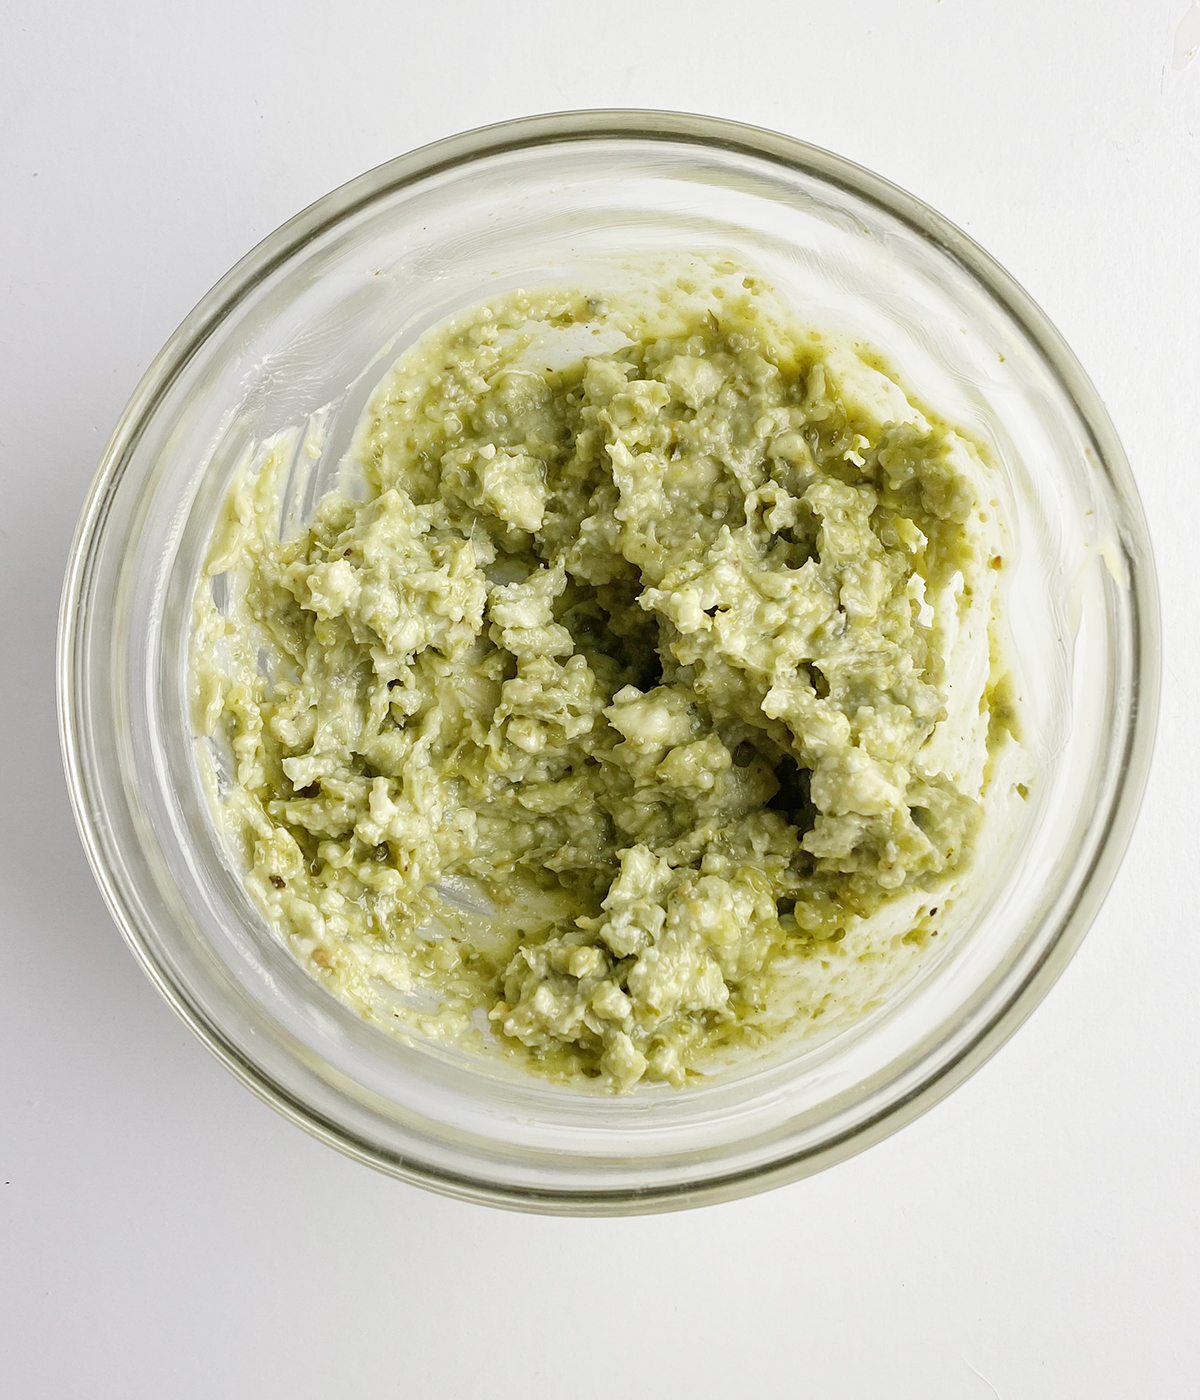 Blue cheese pesto and butter mixture in a mixing bowl.